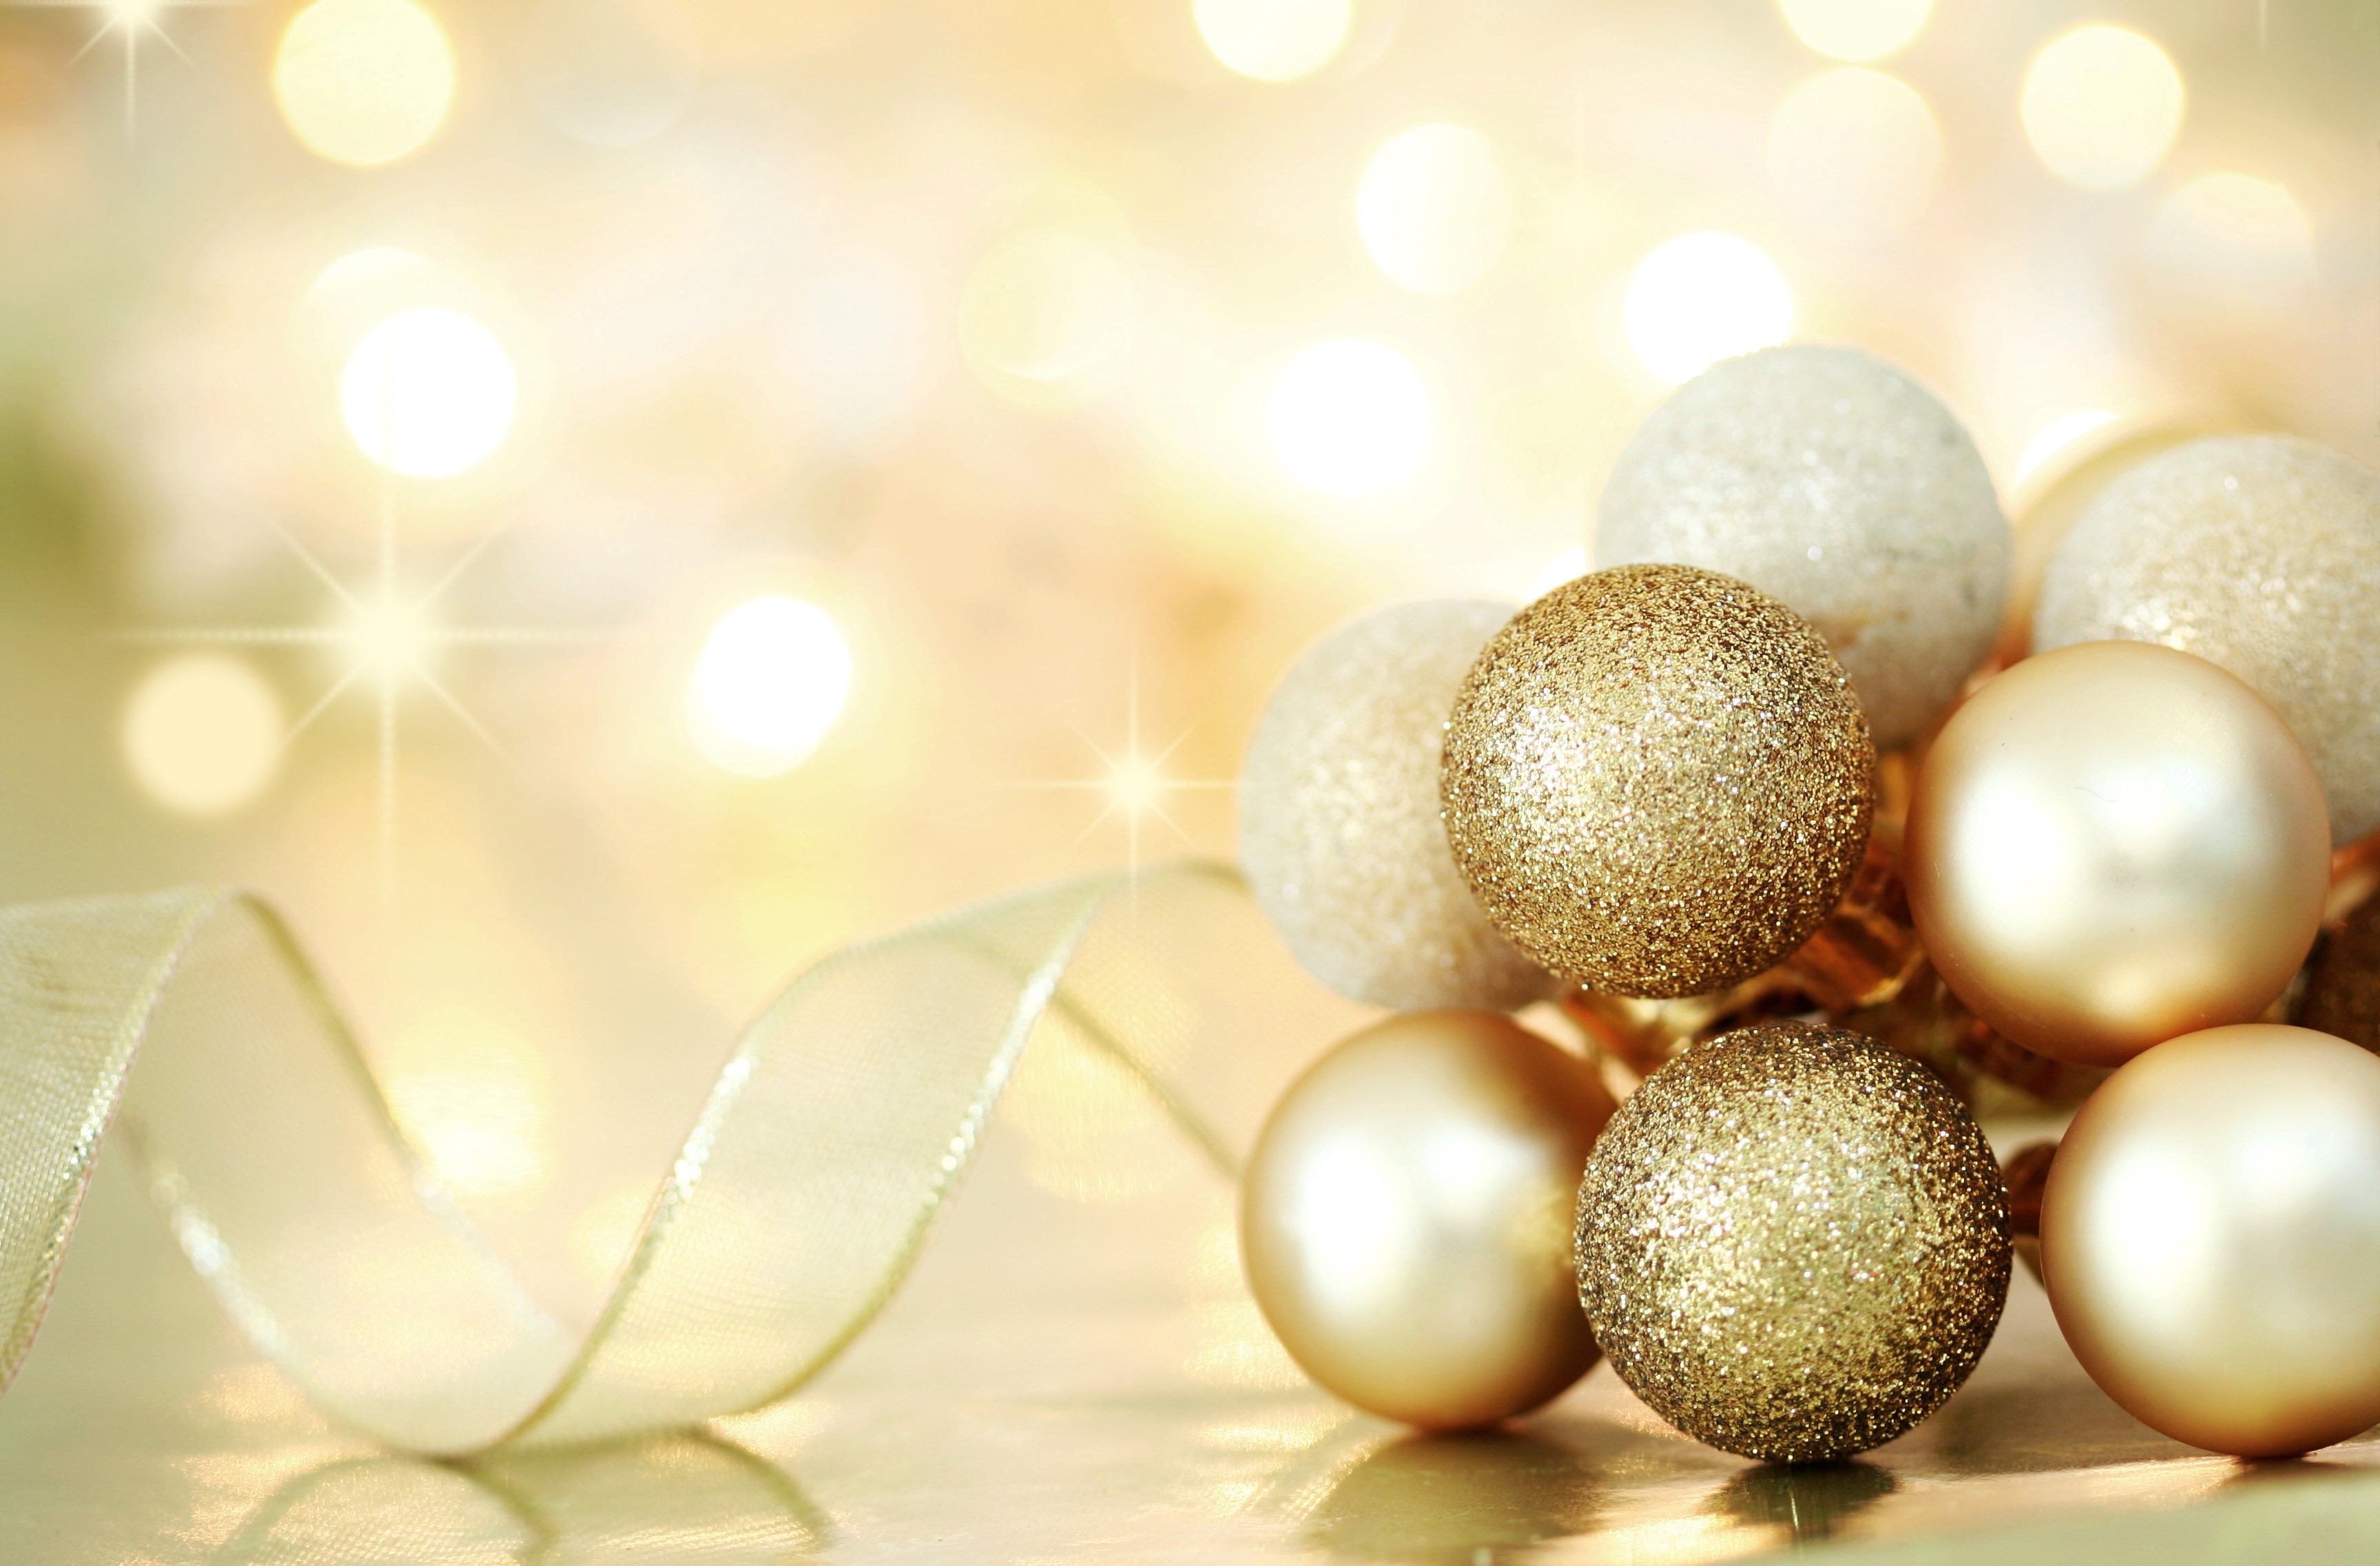 Silver And Gold Christmas Wallpapers Wallpaper Cave